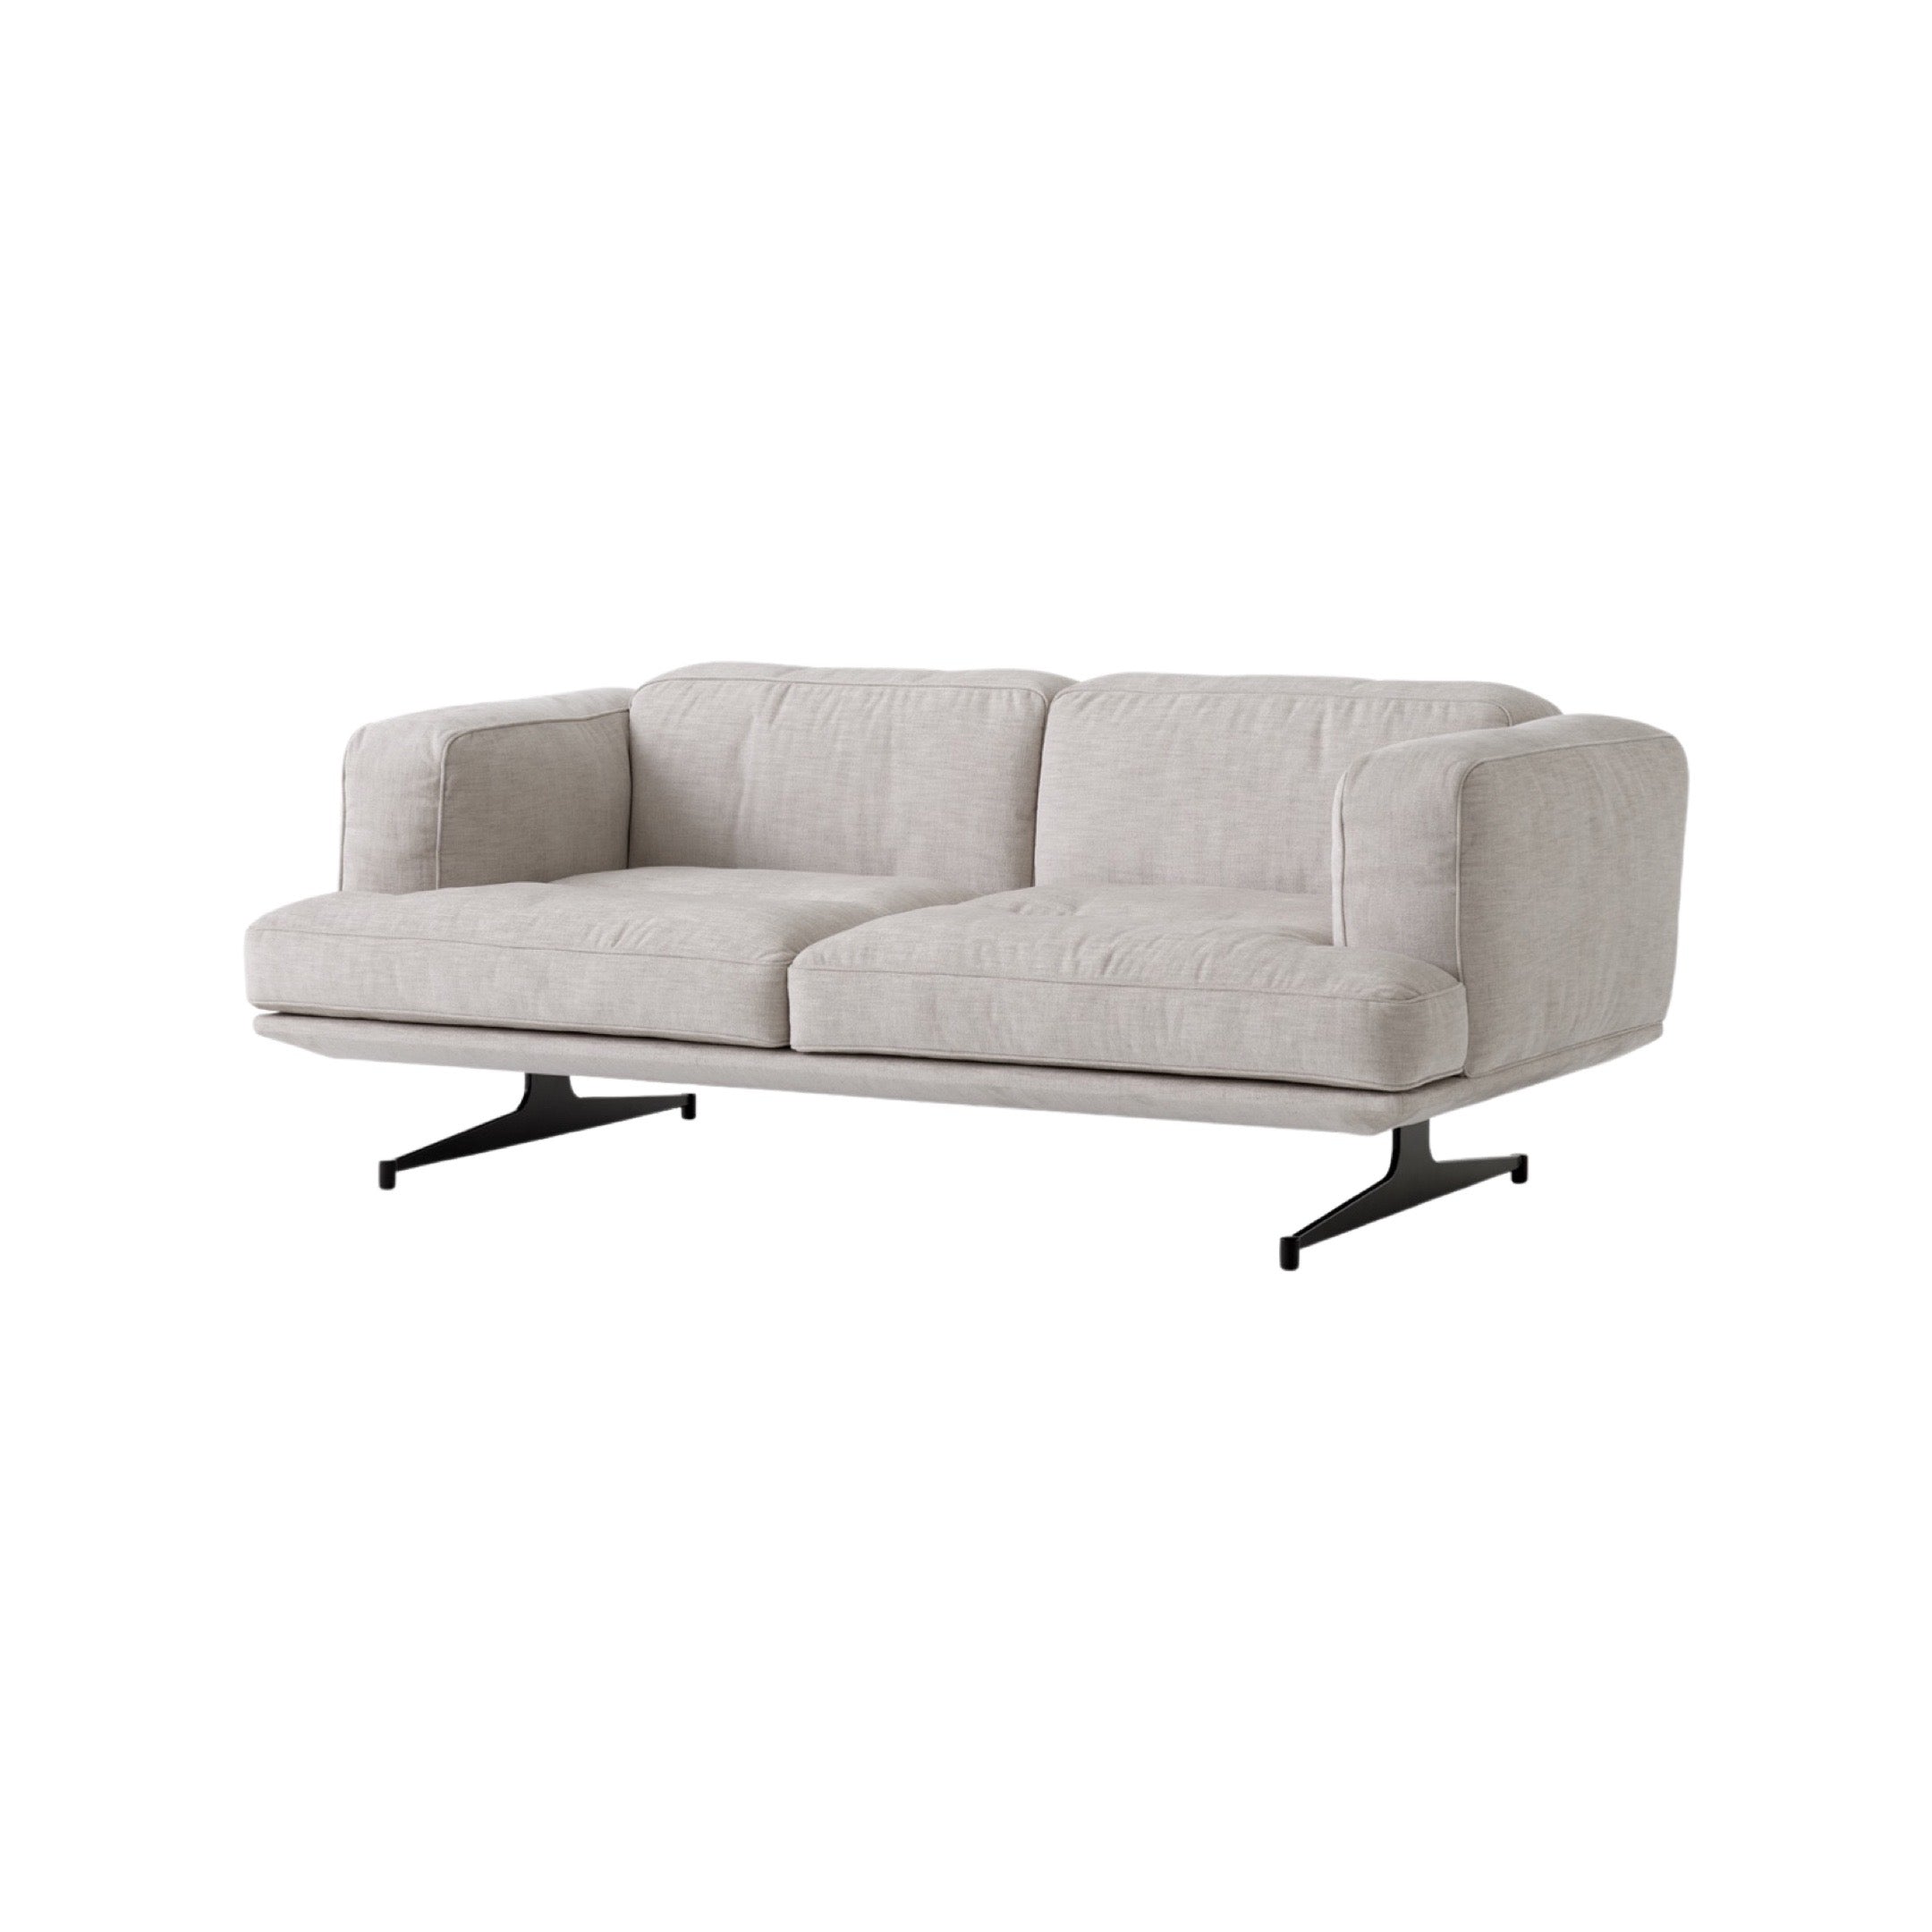 &Tradition Inland 2 Seater Sofa